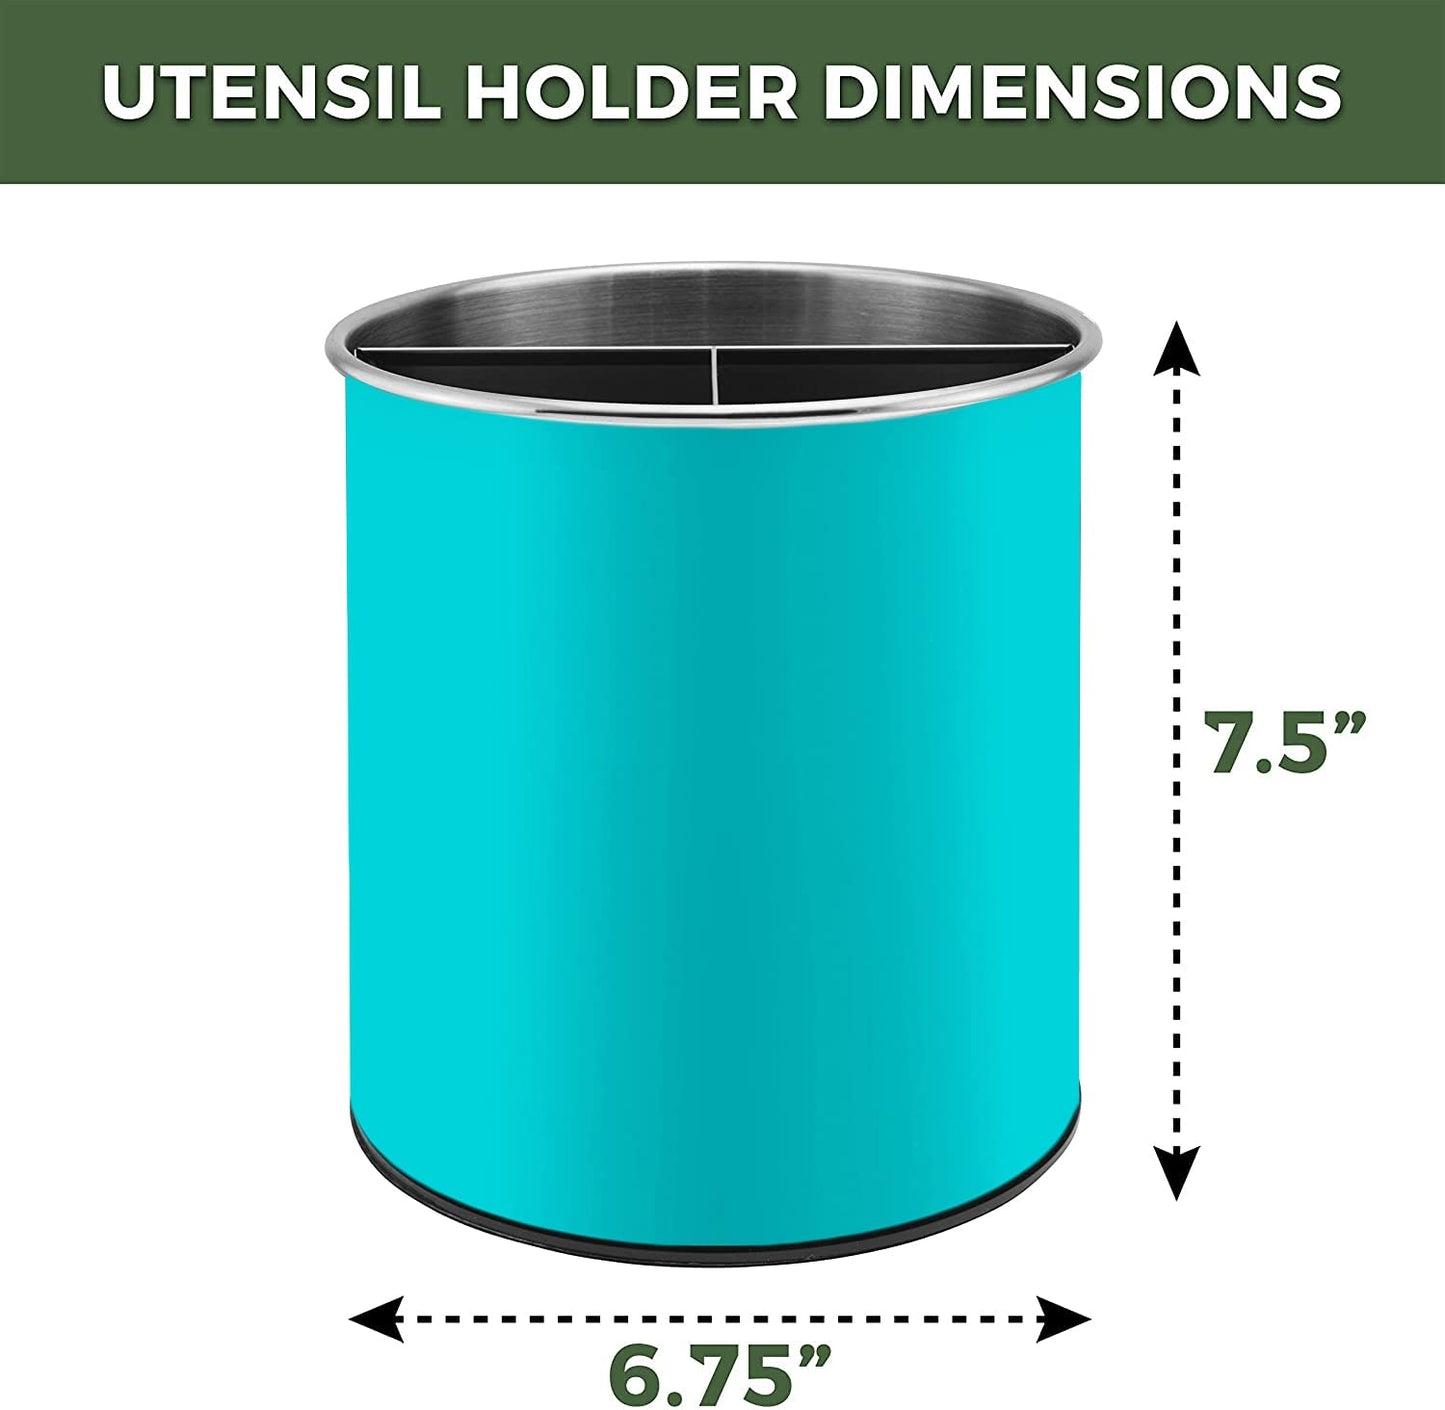 Bartnelli Extra Large Stainless Steel Kitchen Utensil Holder - 360° Rotating Utensil Caddy - Weighted Base for Stability - Countertop Organizer Crock With Removable Divider (MISTY TURQUOISE))